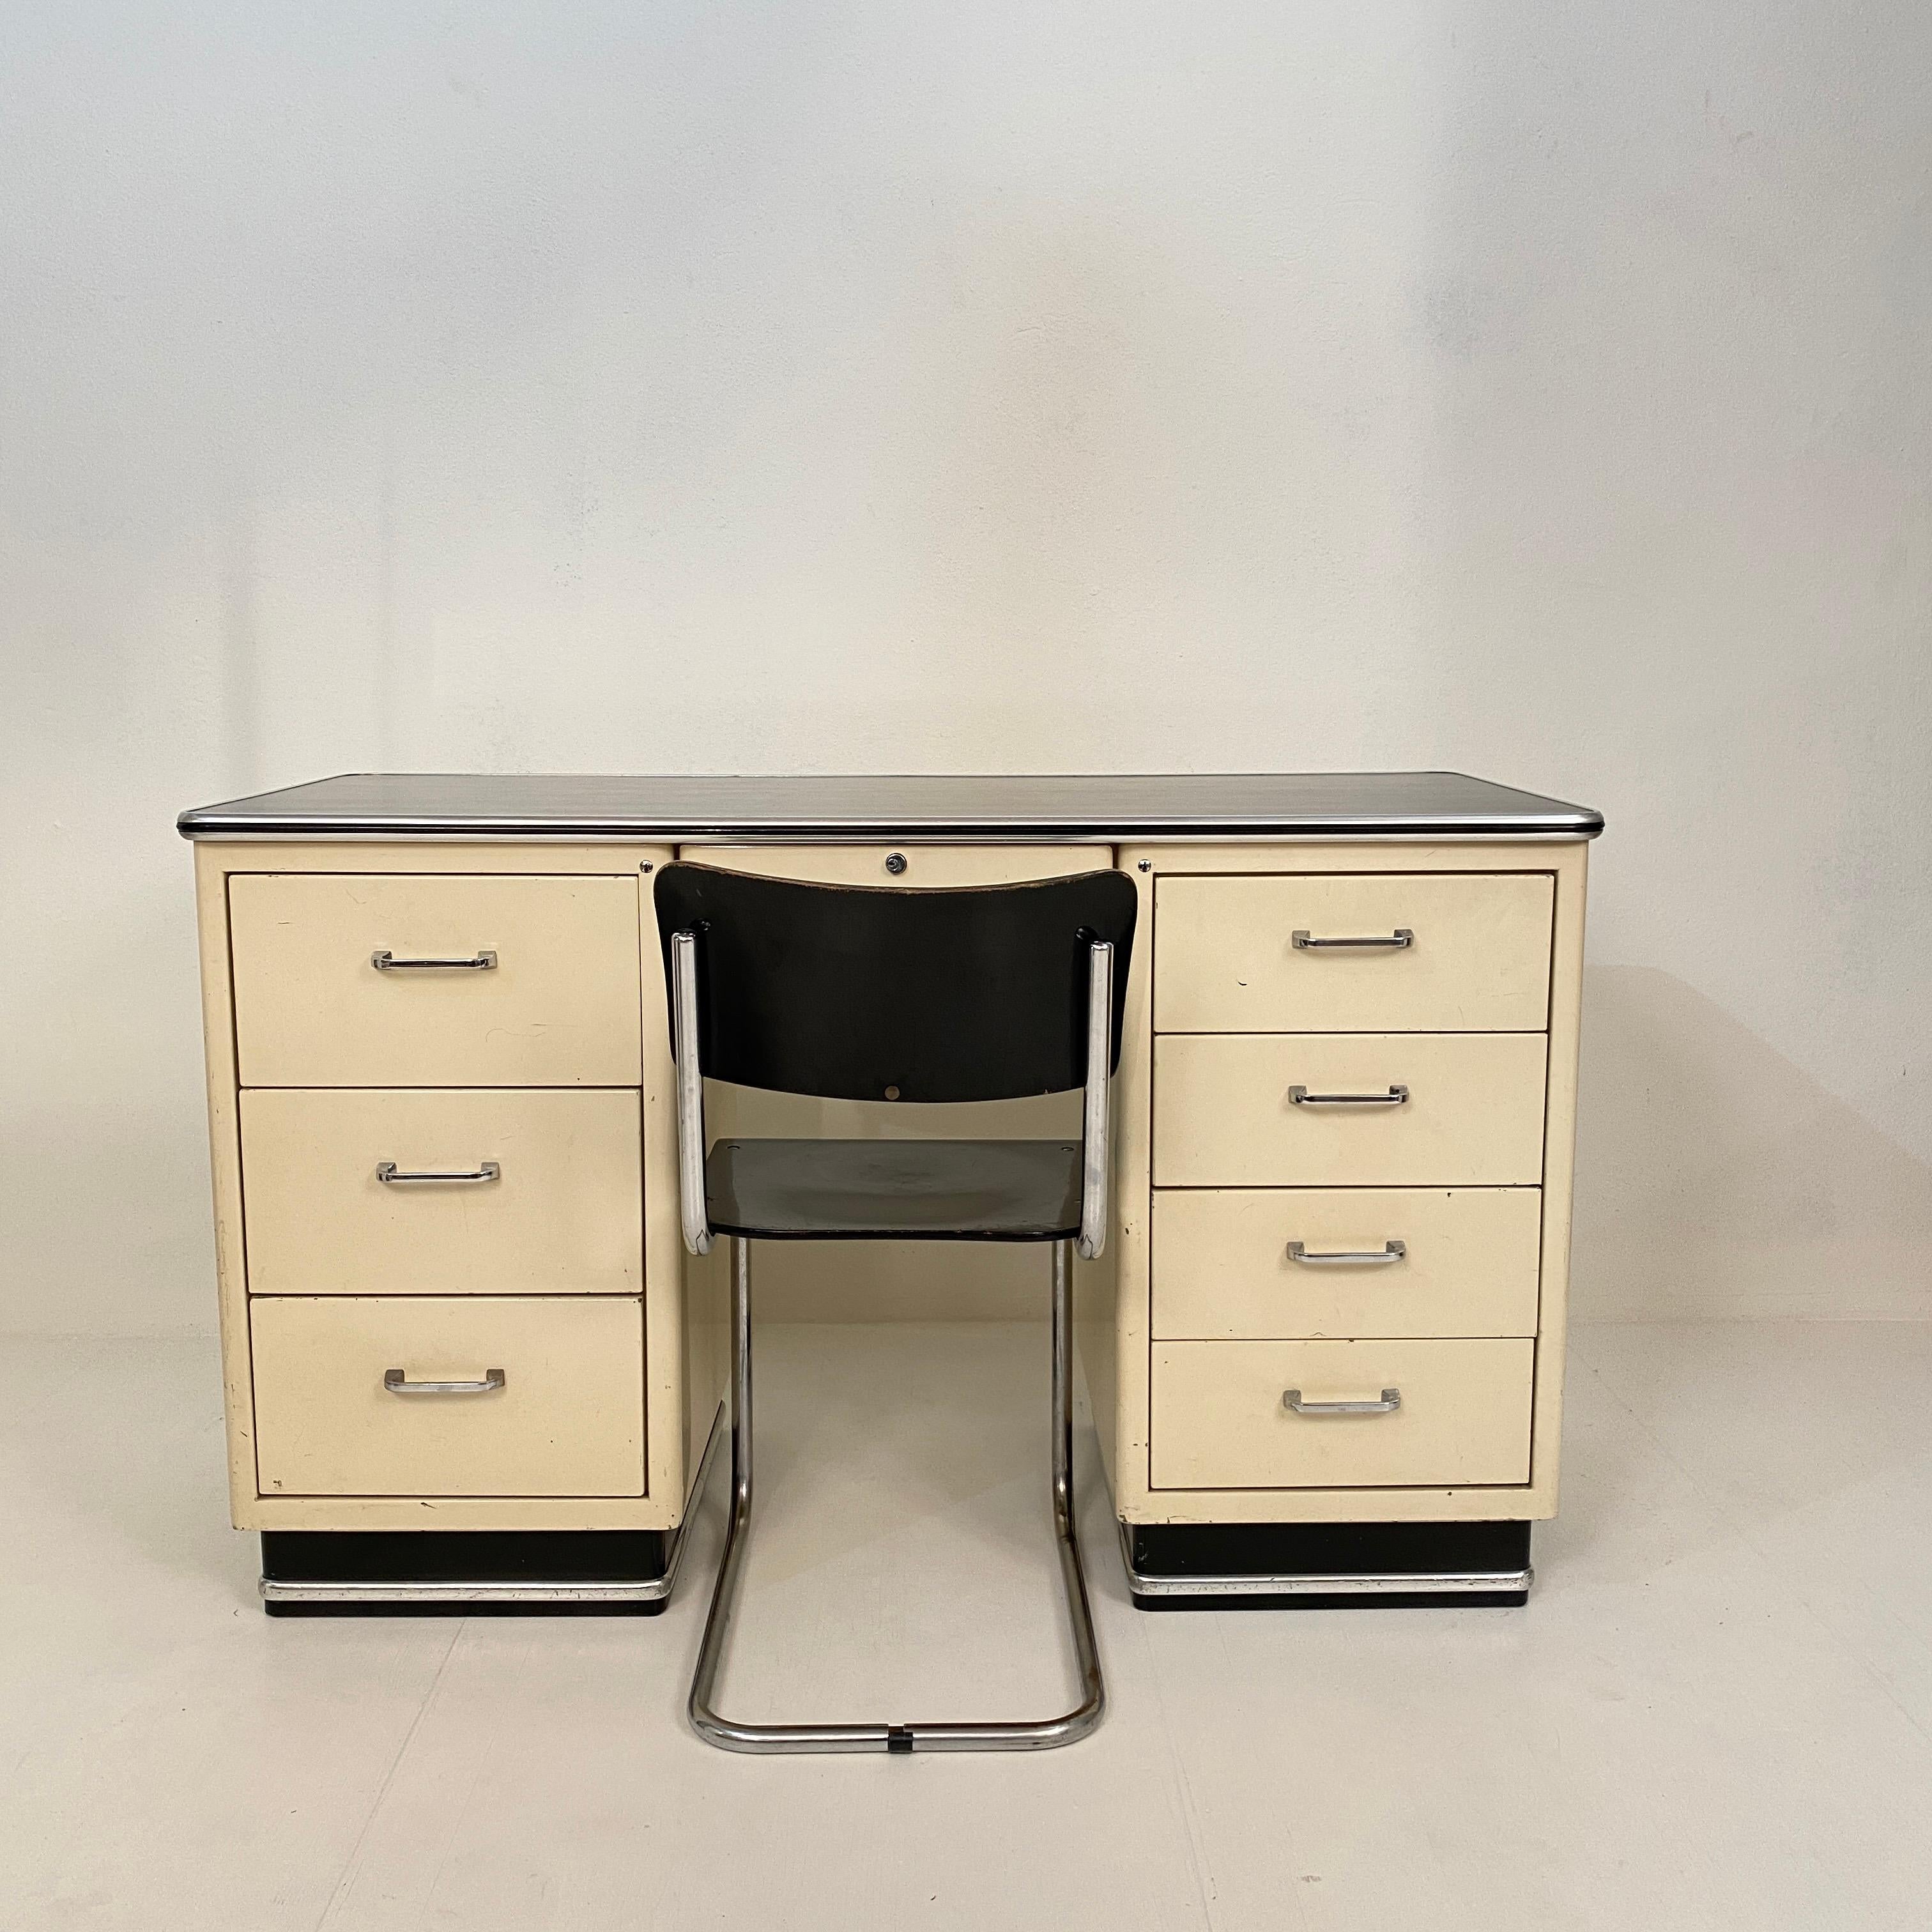 Mid-20th Century 1930s German Bauhaus Desk Out of White Lacquered Metal and a Black Linoleum Top